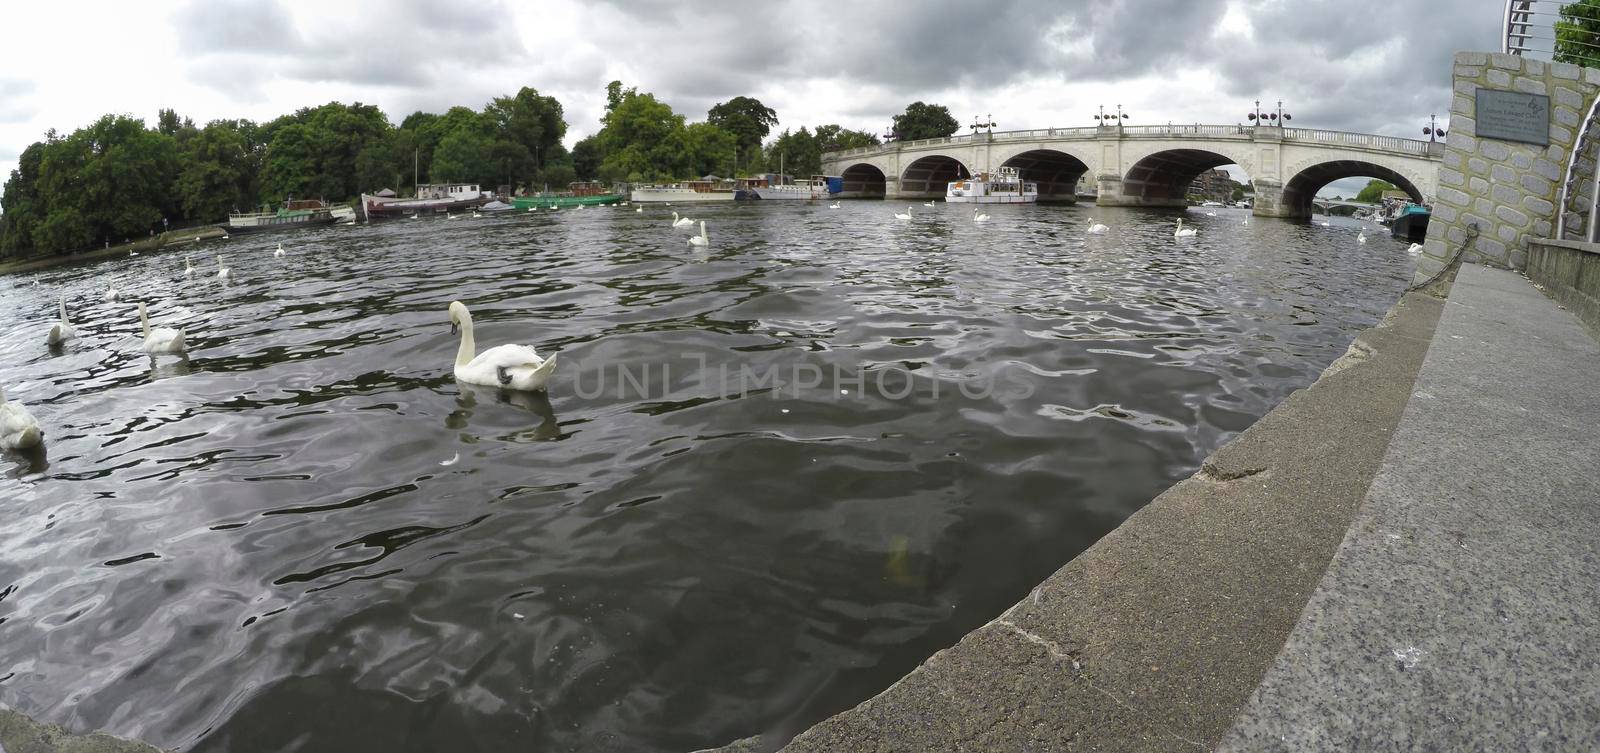 LONDON, ENGLAND - 15 July 2017: Big boat and swans in front of it in Kingston, London, UK